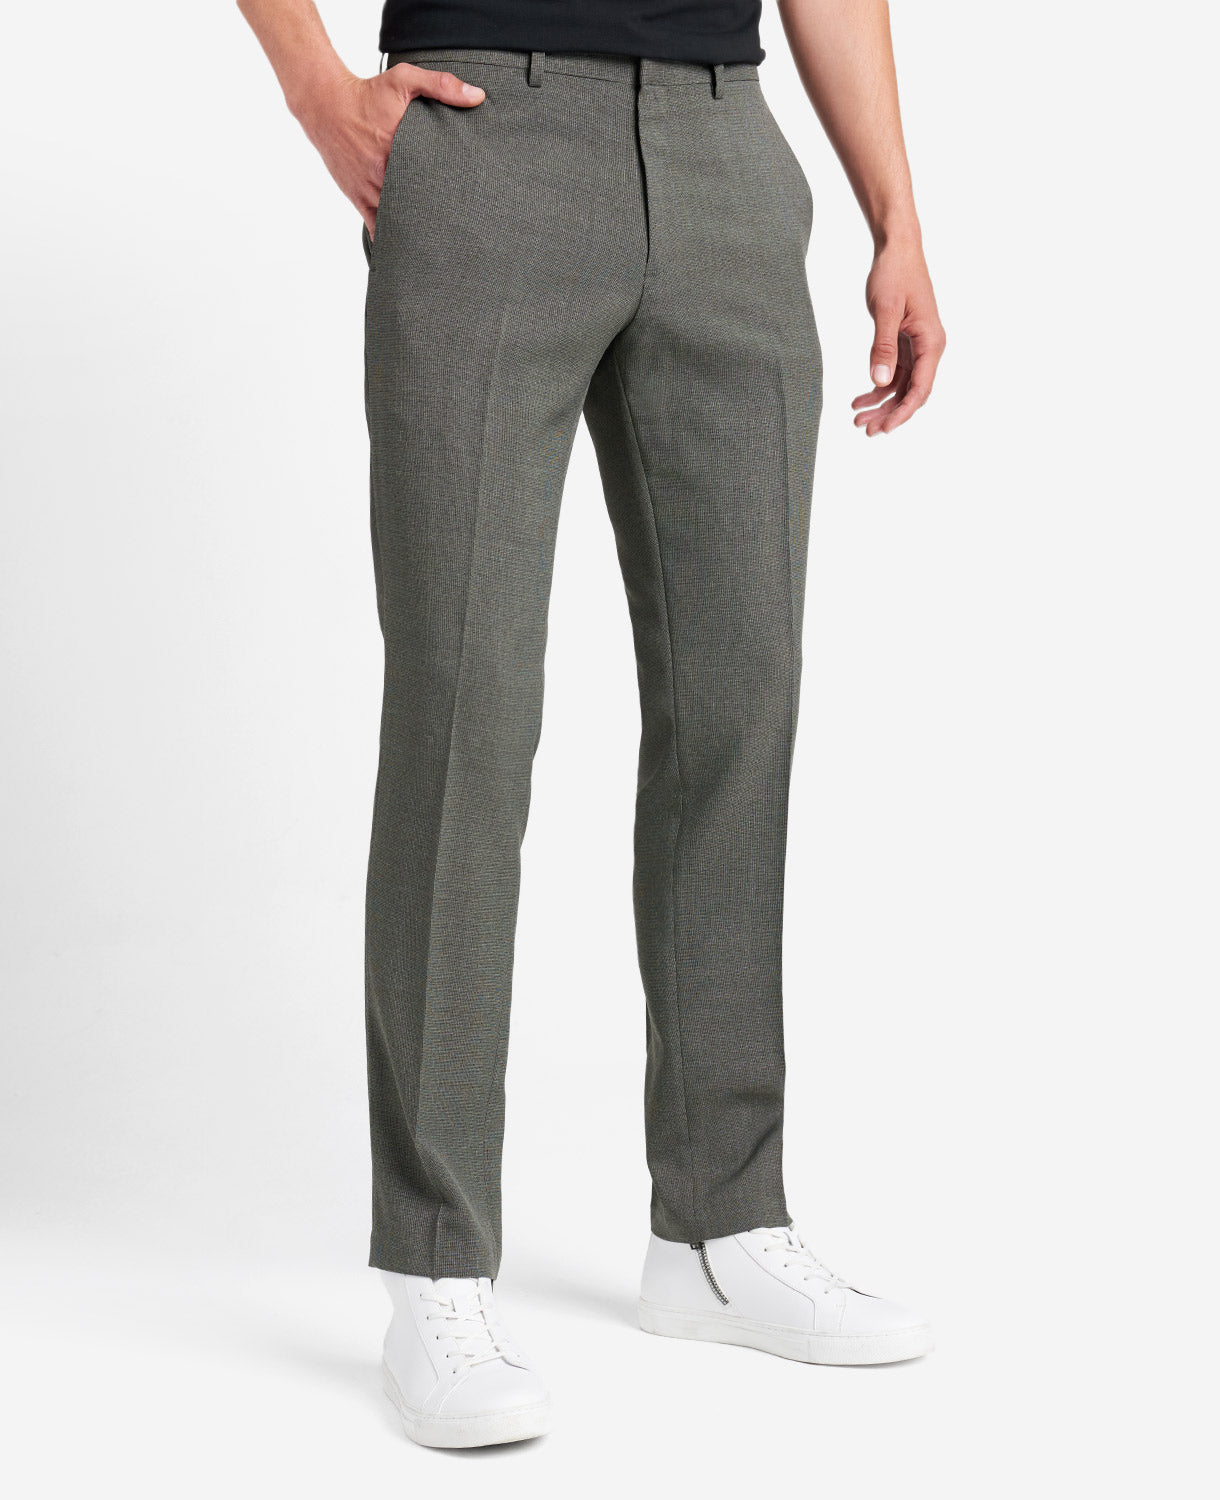 Kenneth Cole Reaction Tic Weave Slim Fit Dress Pant in Medium Grey, Size: 30/30